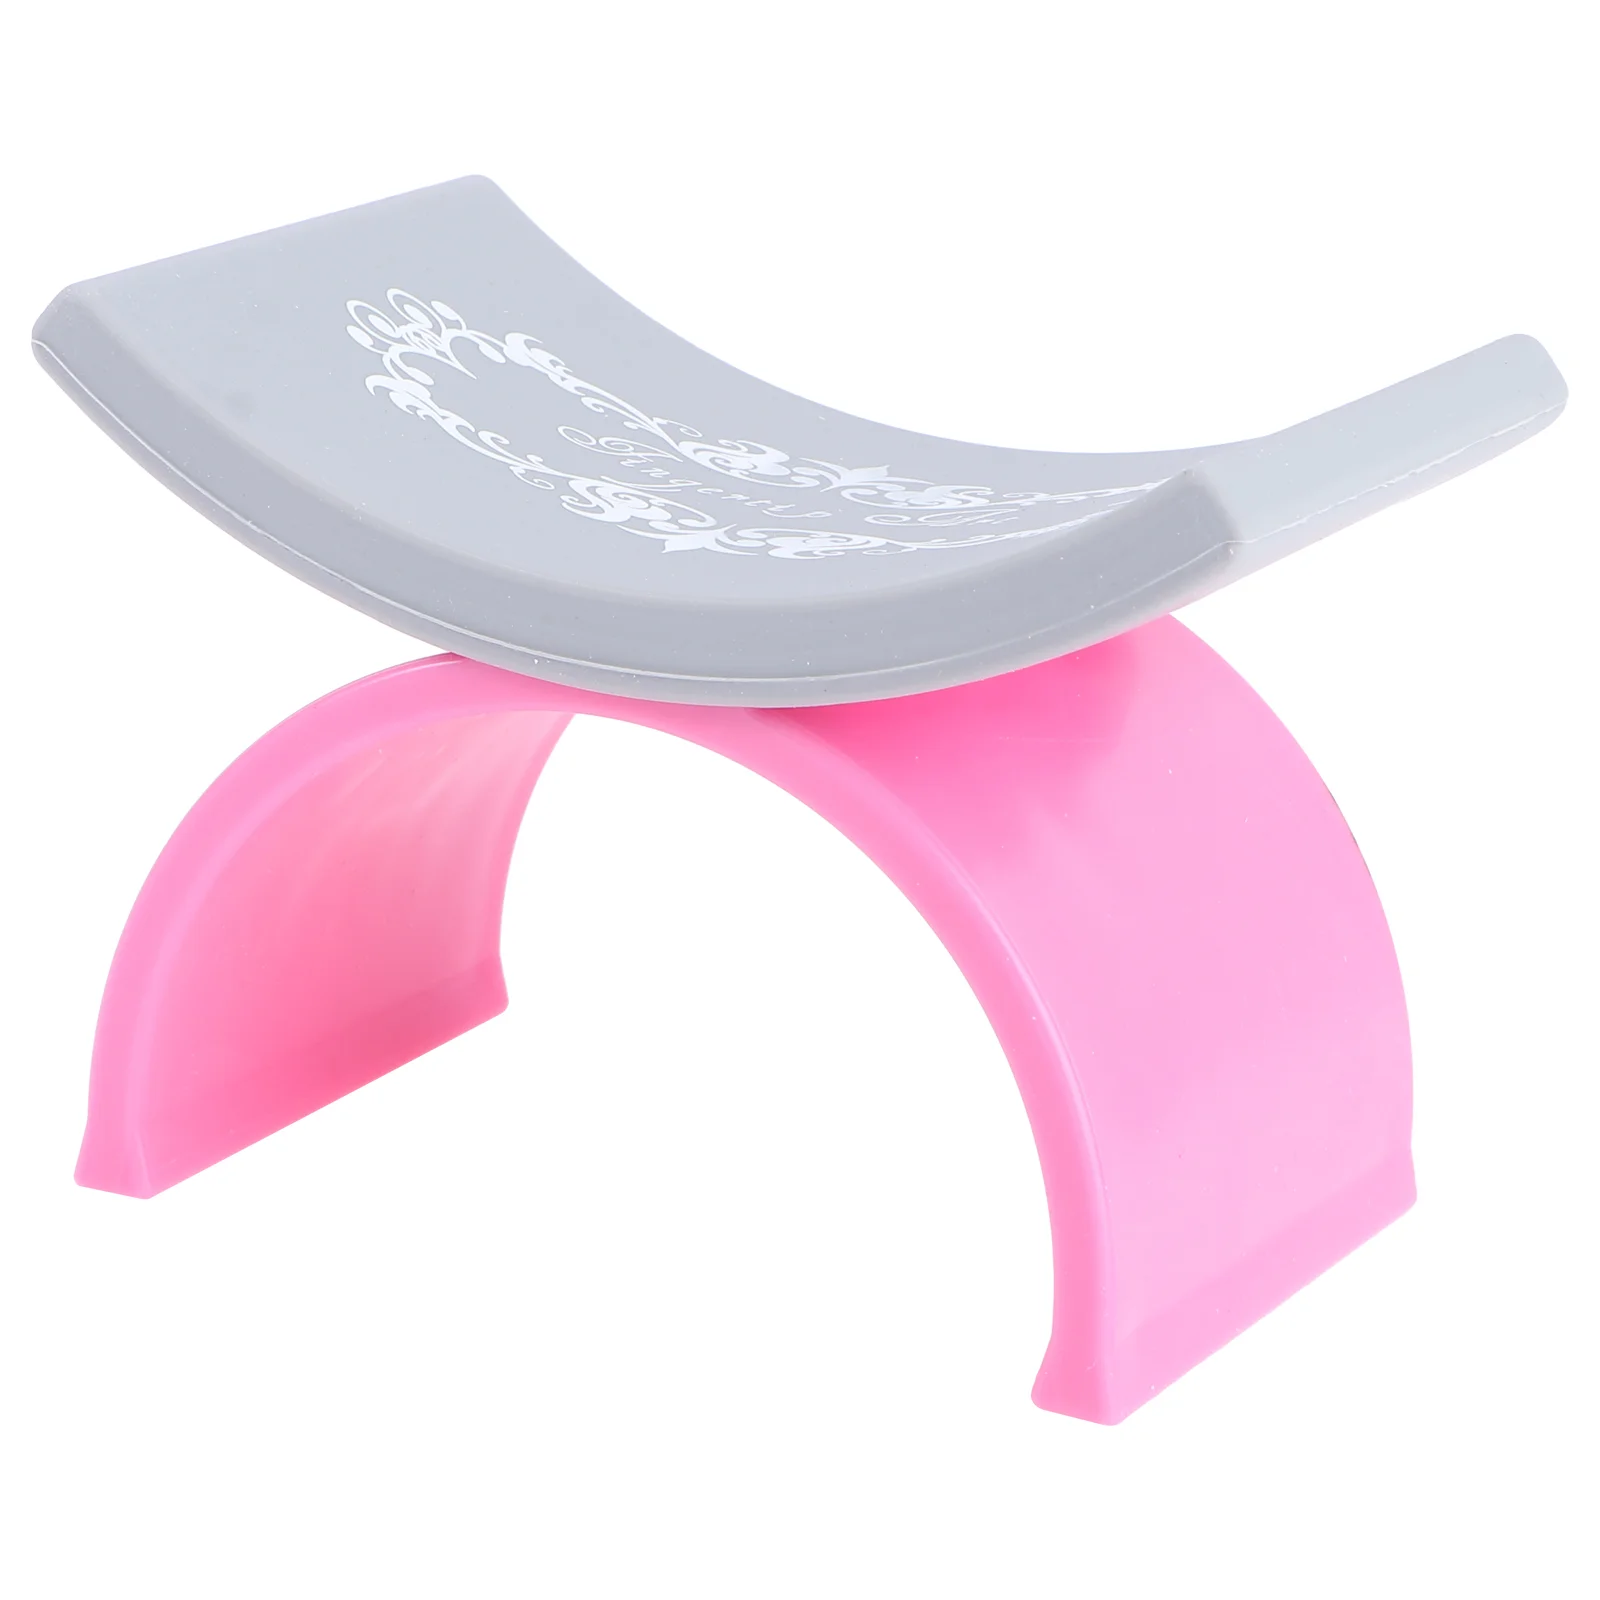 

Nail Hand Rest Pillow Cushion Arm Manicure Salon Holder Table Wrist Equipment Nails Armrest Silicone Pad Sponge Resting Tool